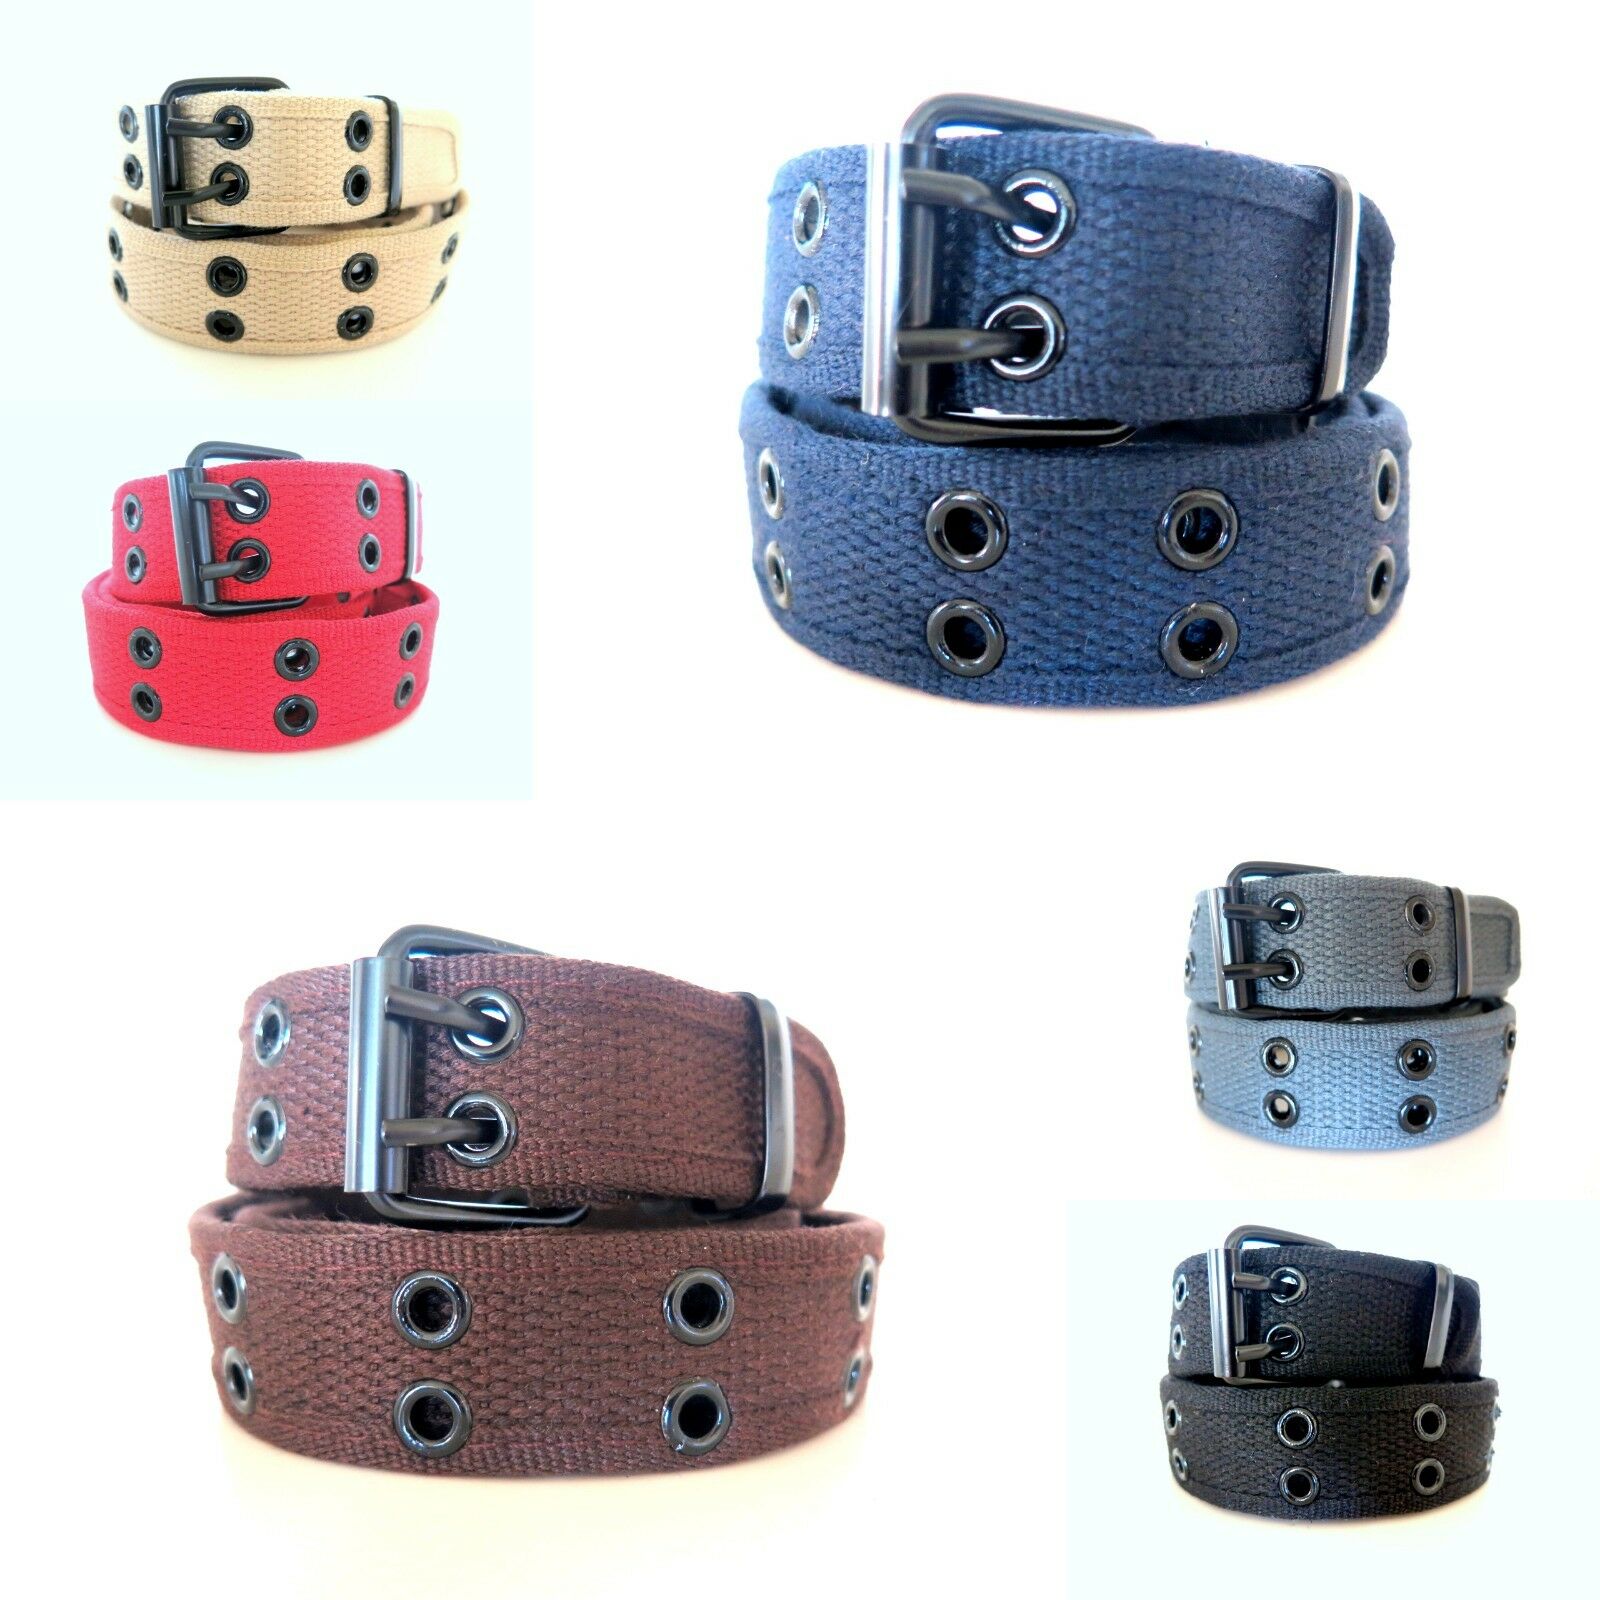 Kids Stitched Canvas Fabric 2 Holes Row Grommets Boys Girls Childrens Belt